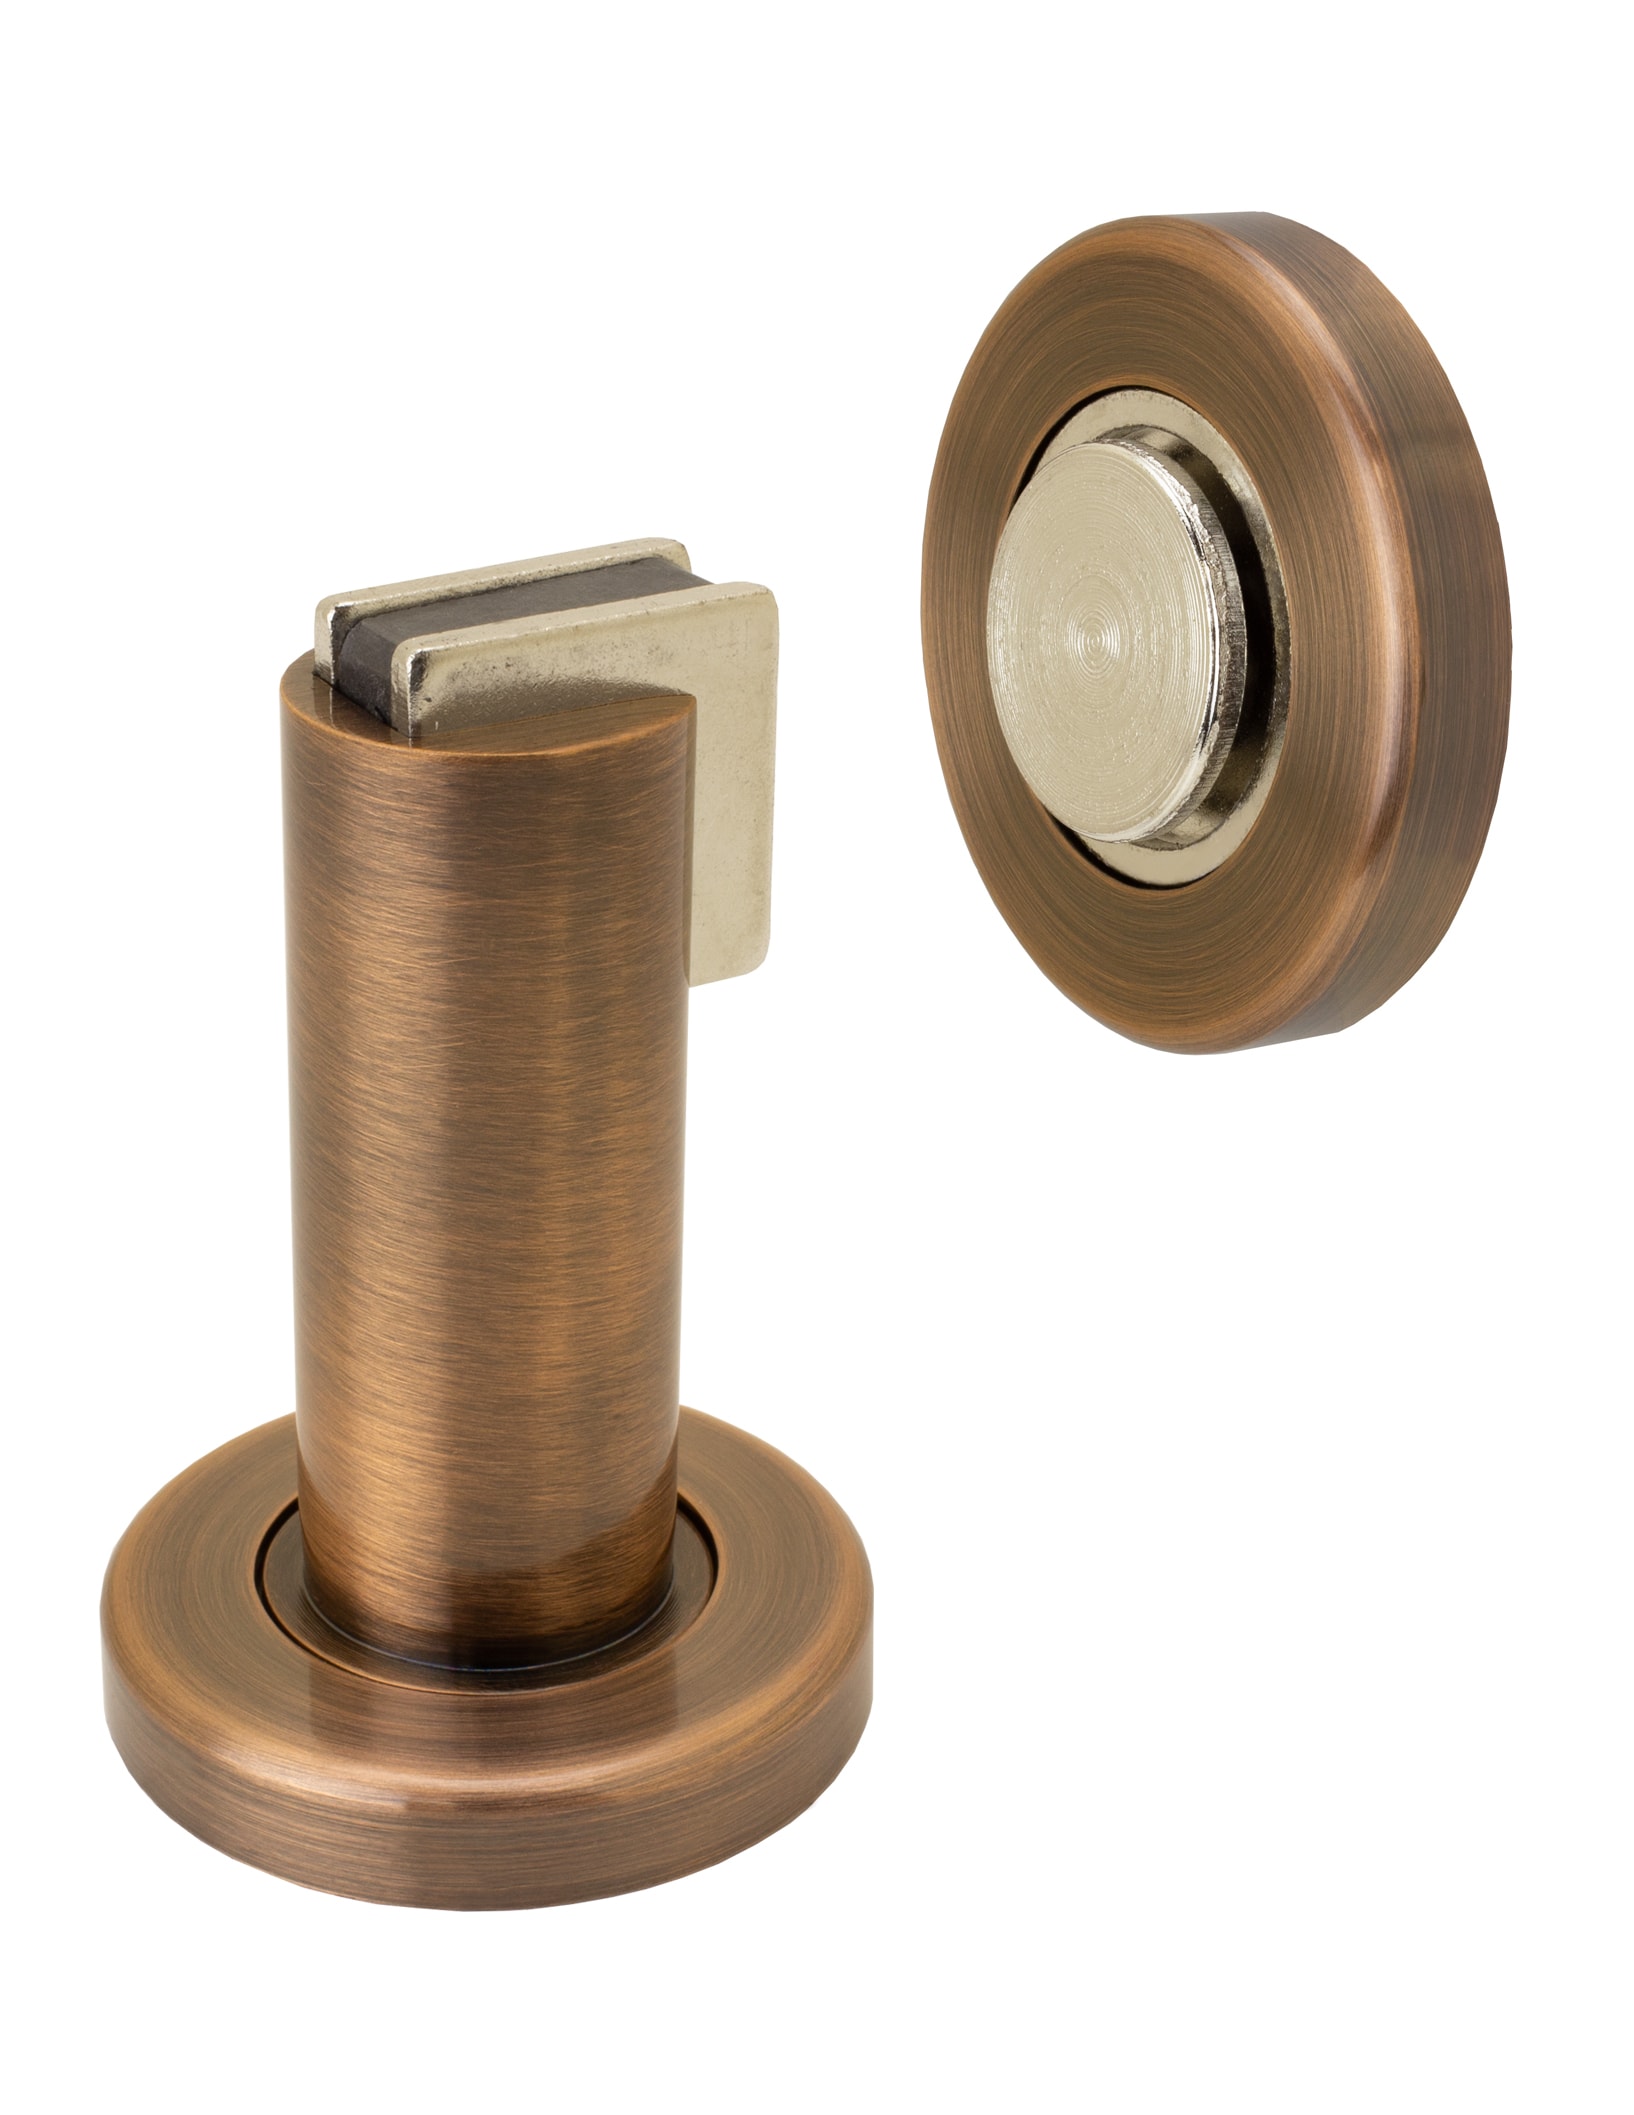 New Polished Brass Magnetic Door Holder stop stoppers 